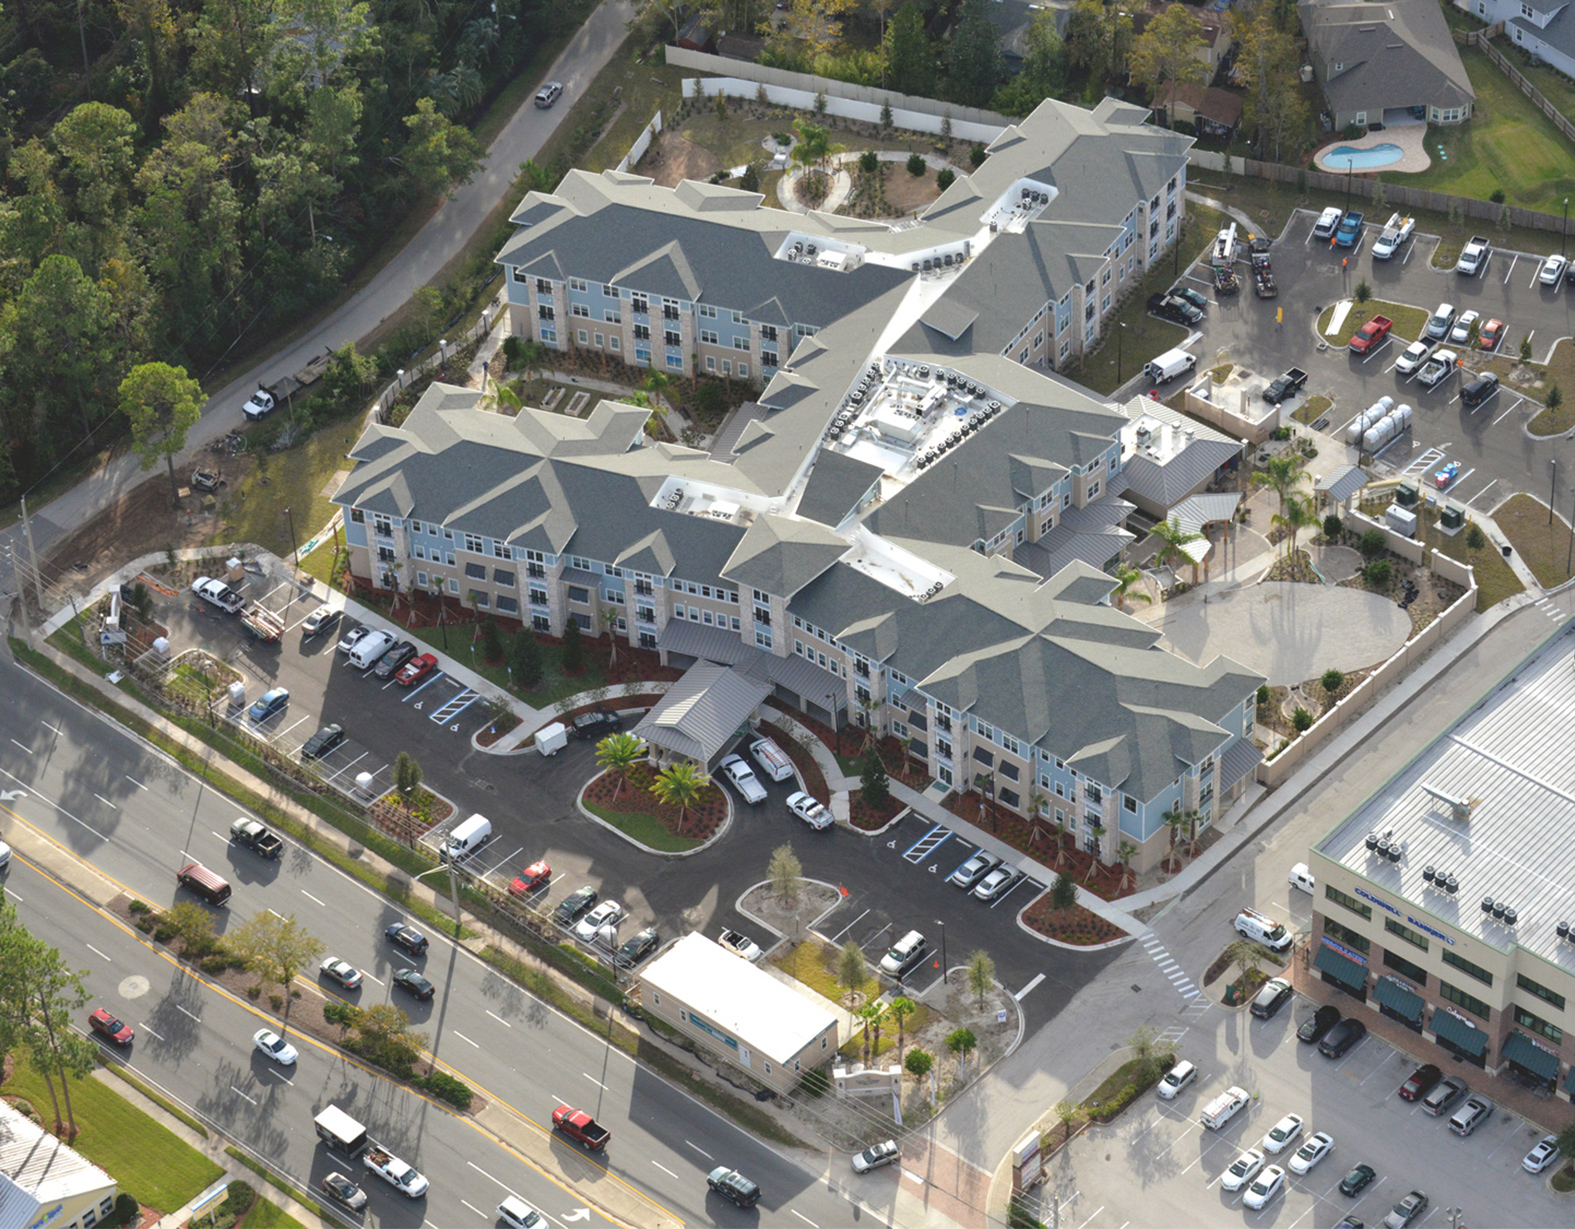 Senior living facility aerial view of complex and parking lot